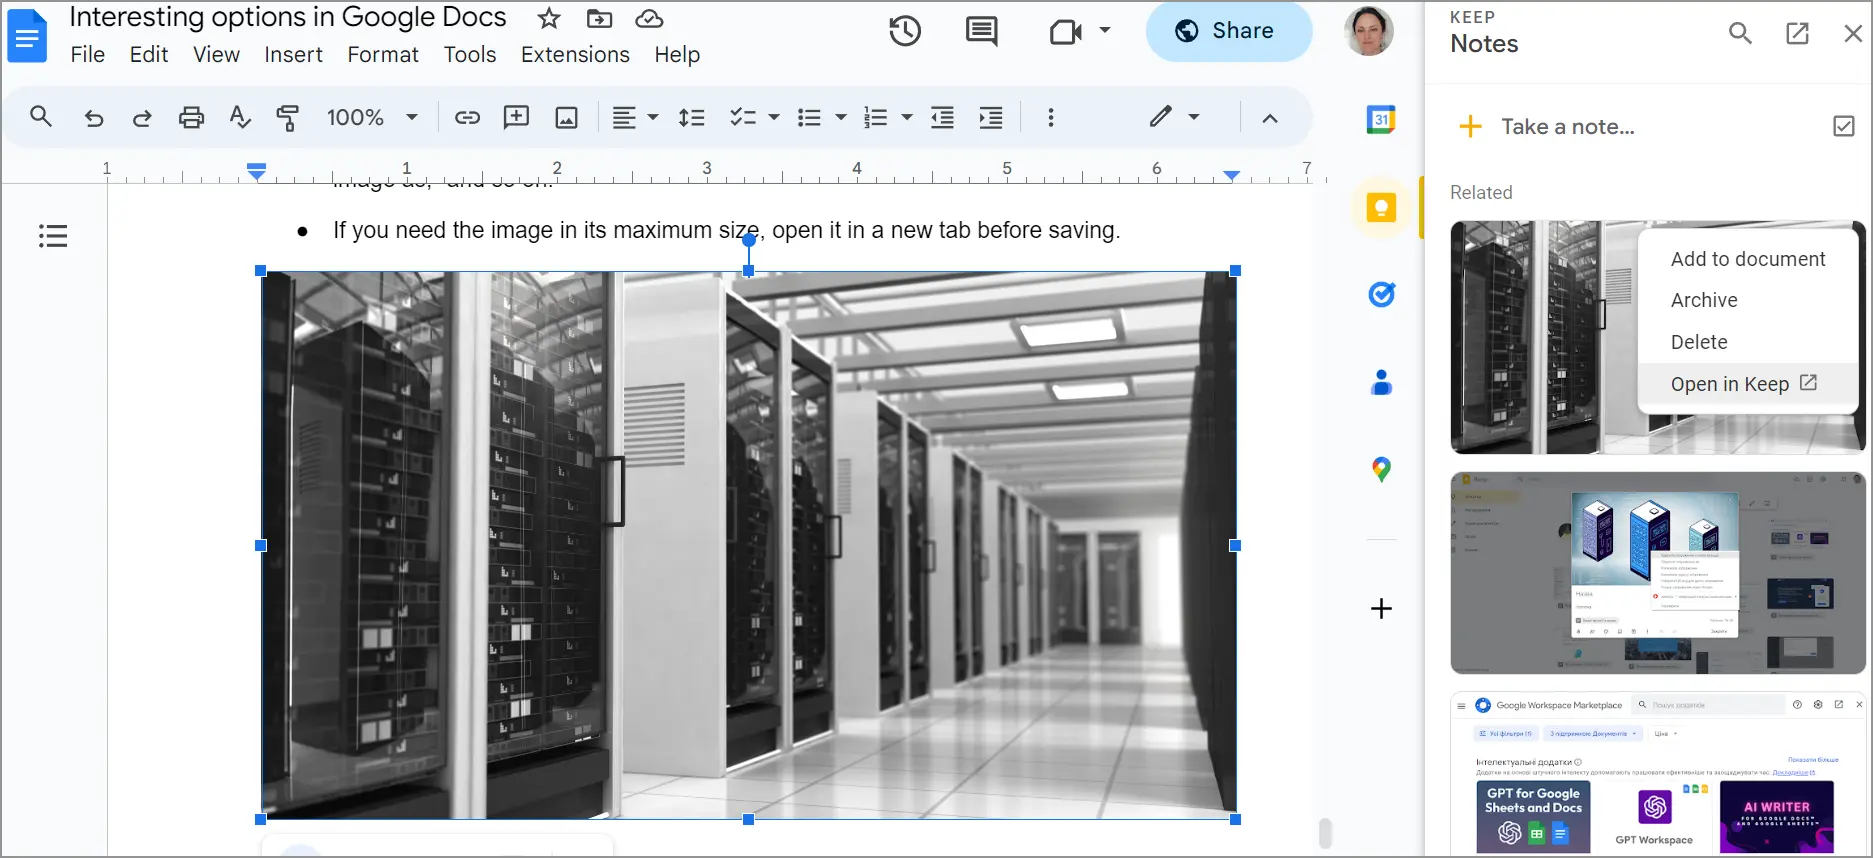 How to Save an Image from Google Docs Using Keep